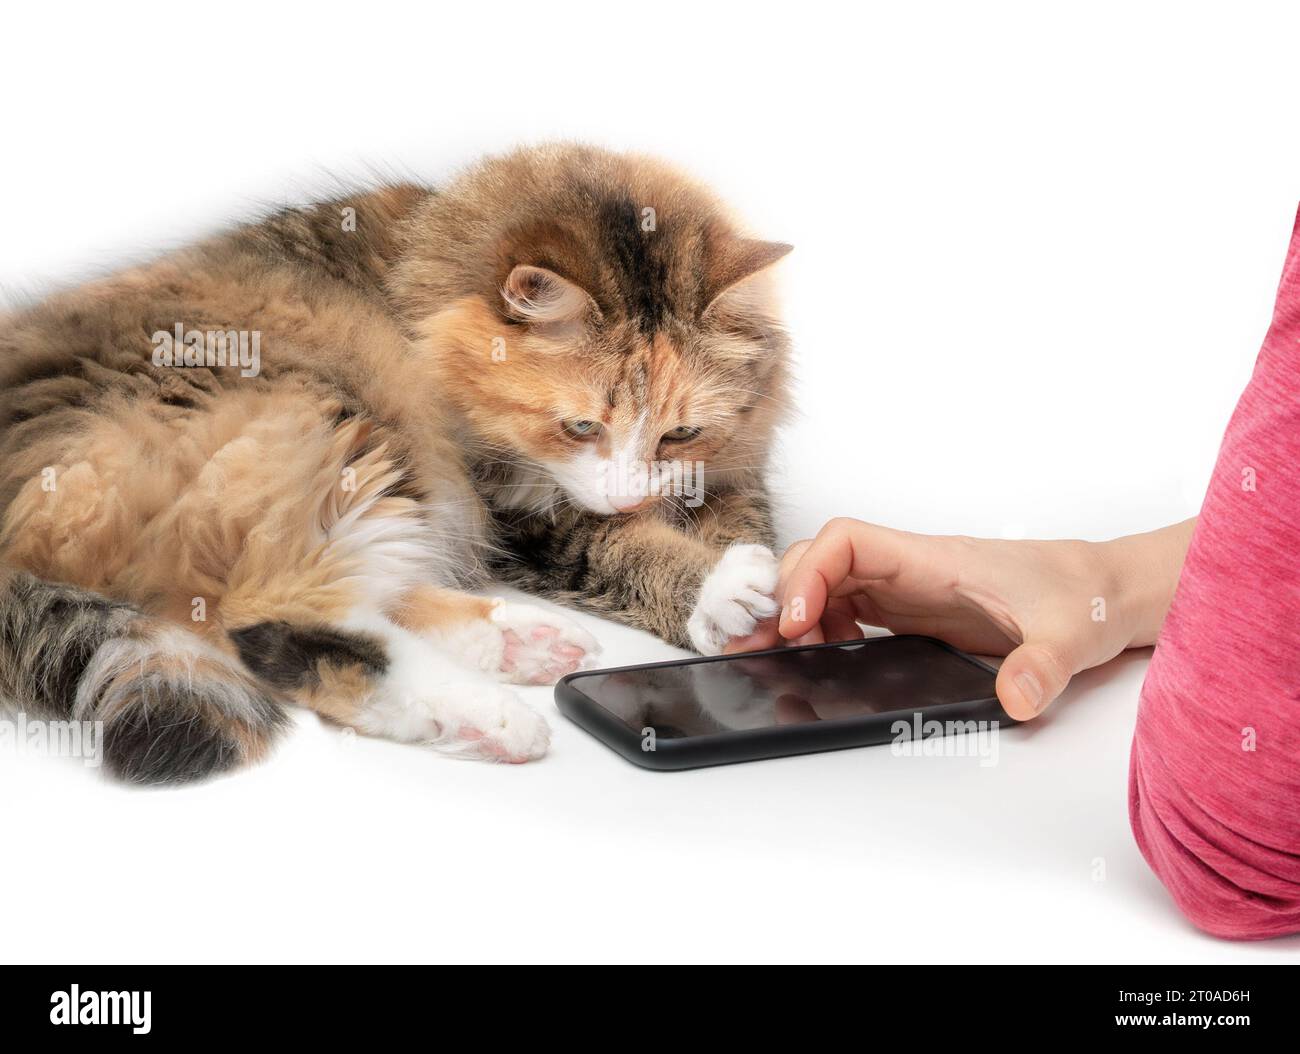 Fluffy cat using smartphone with owner. Kitty with paw on hand of woman while lying behind phone on a table. Phone with black screen. Pets using techn Stock Photo